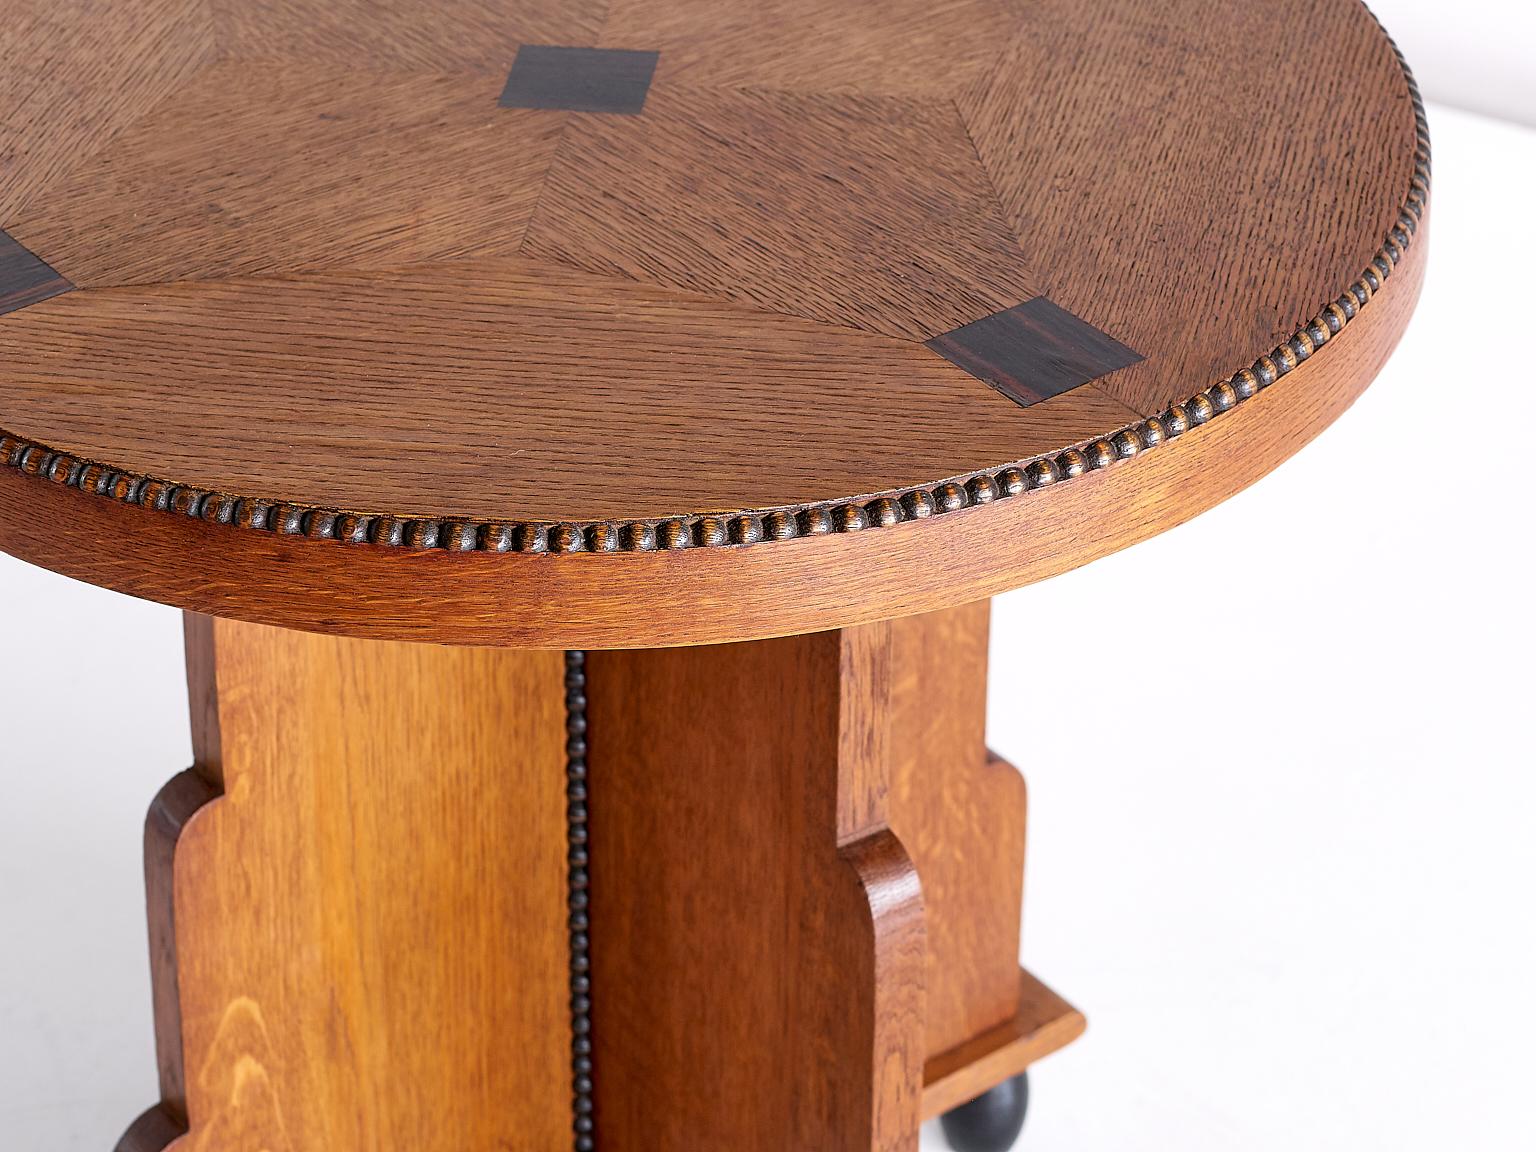 Stained Art Deco Amsterdam School Side Table in Oak and Macassar Ebony, Early 1930s